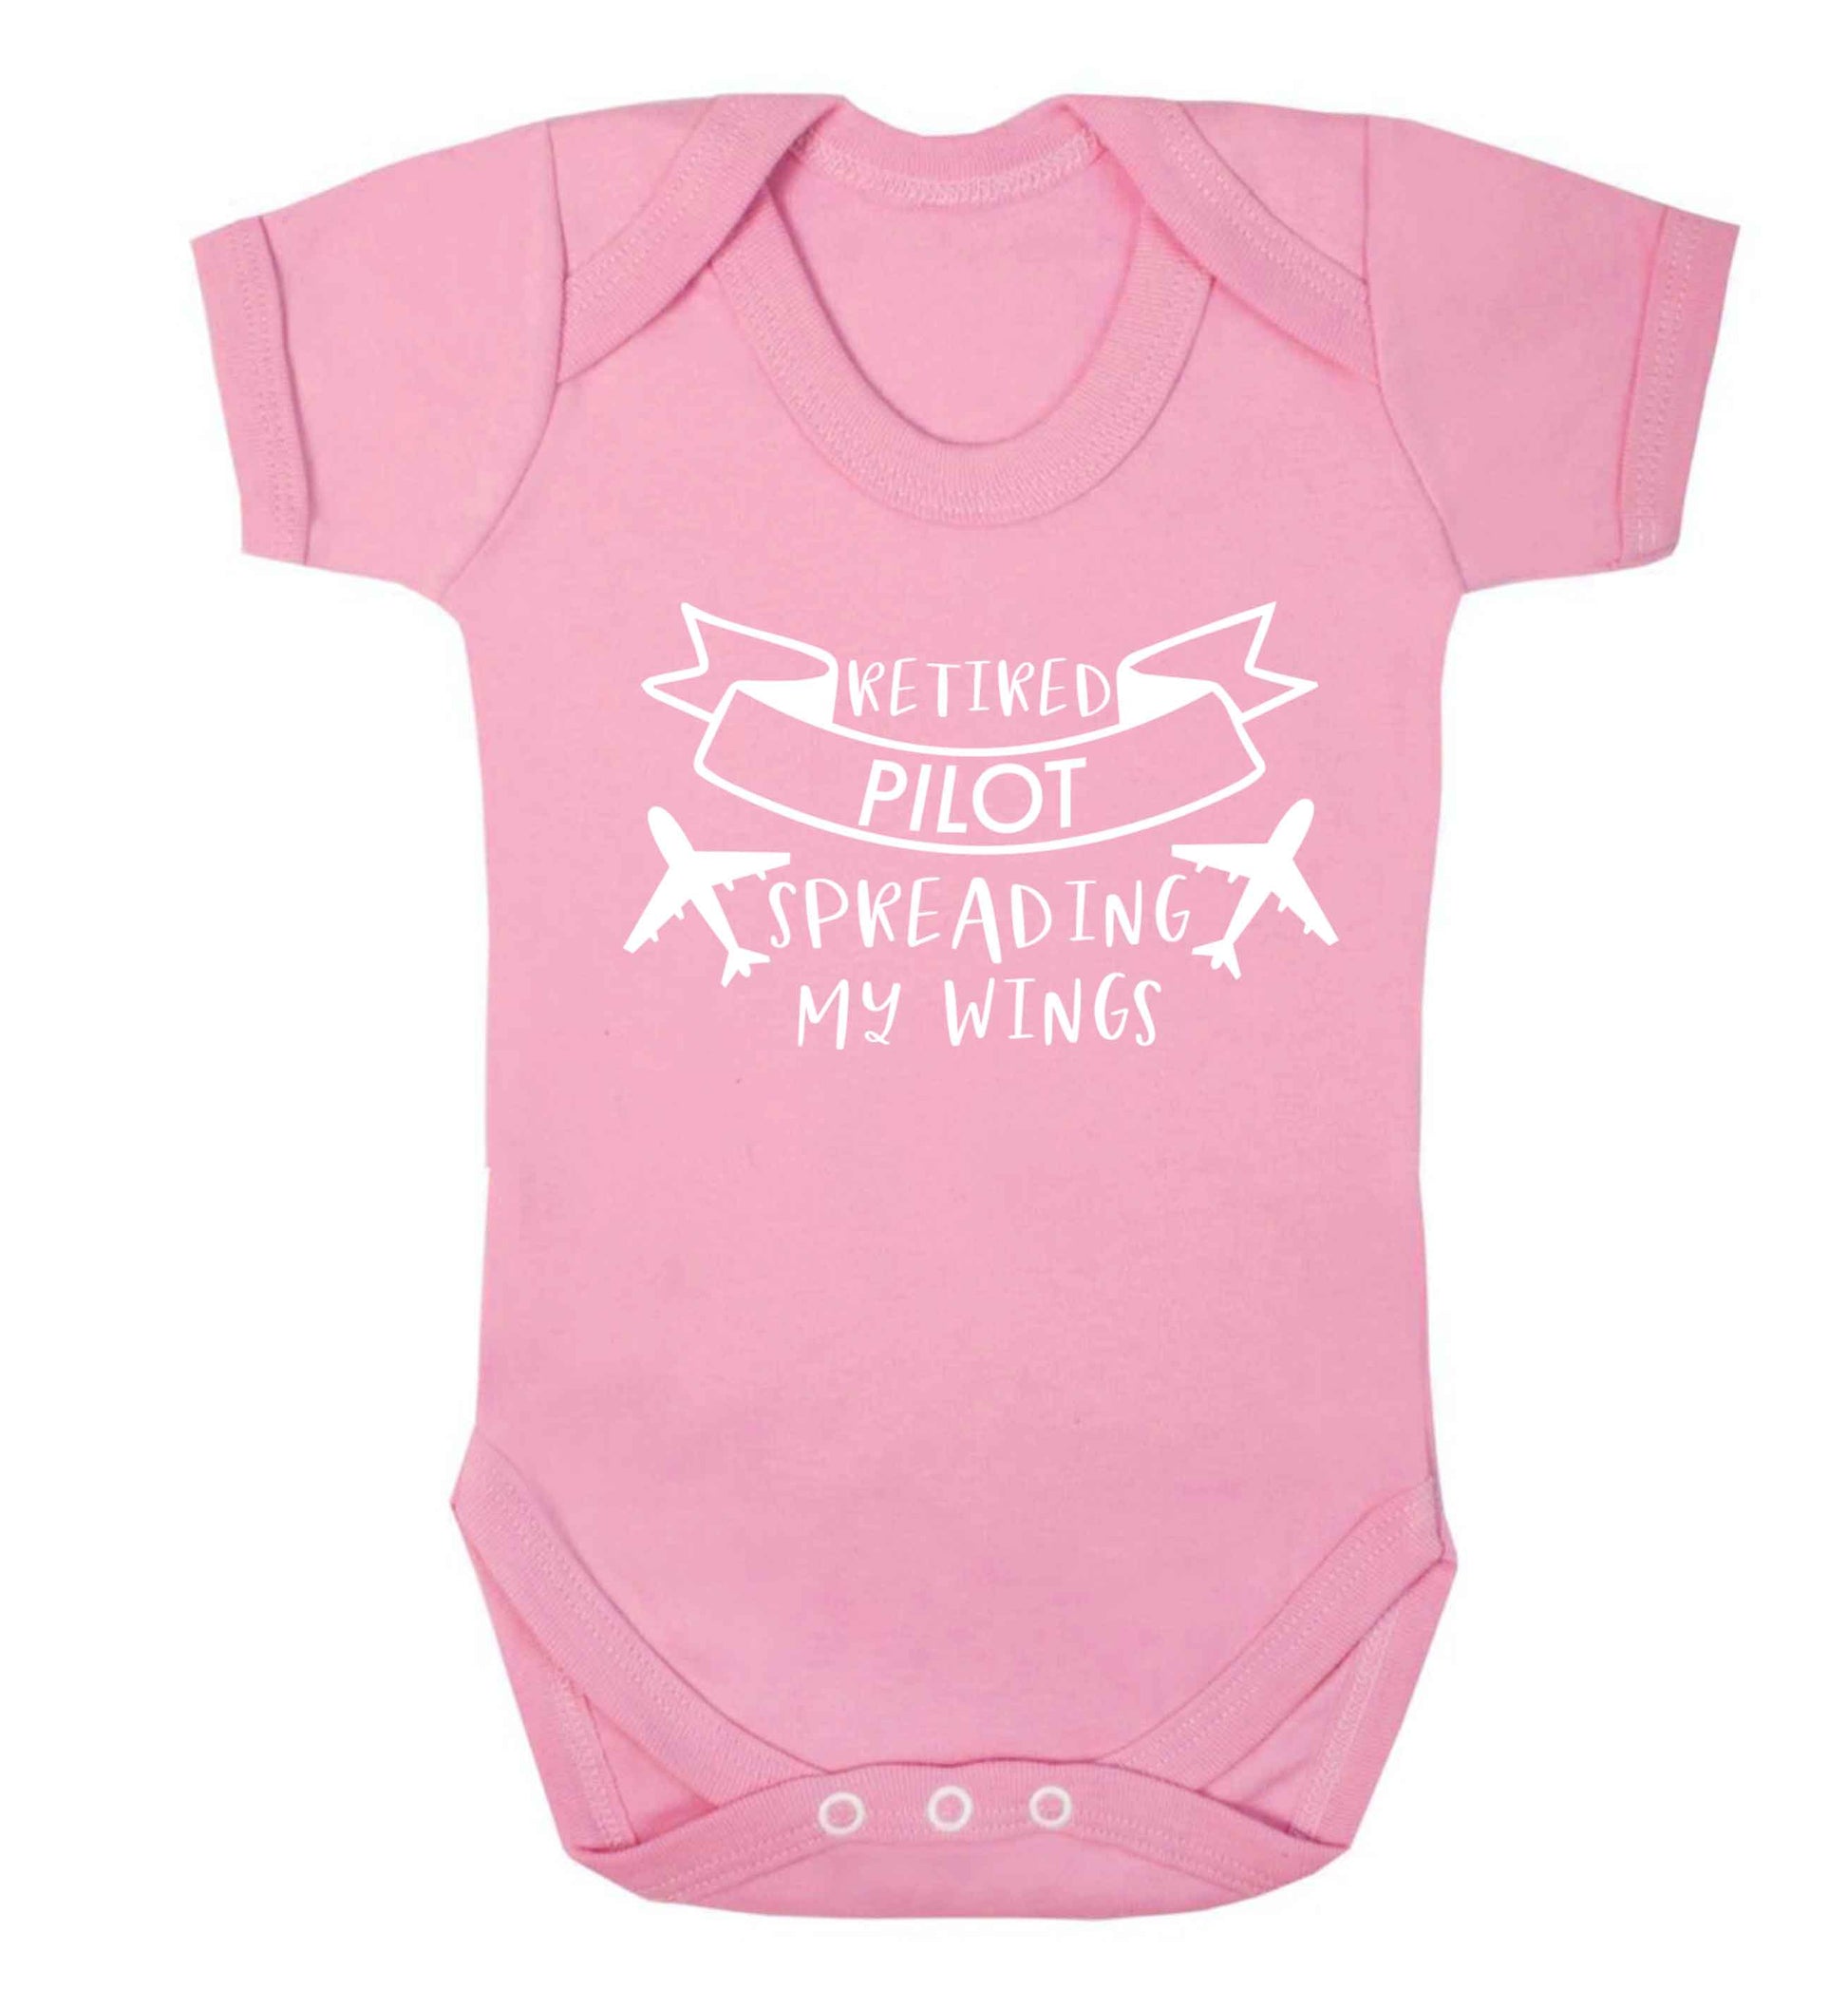 Retired pilot spreading my wings Baby Vest pale pink 18-24 months